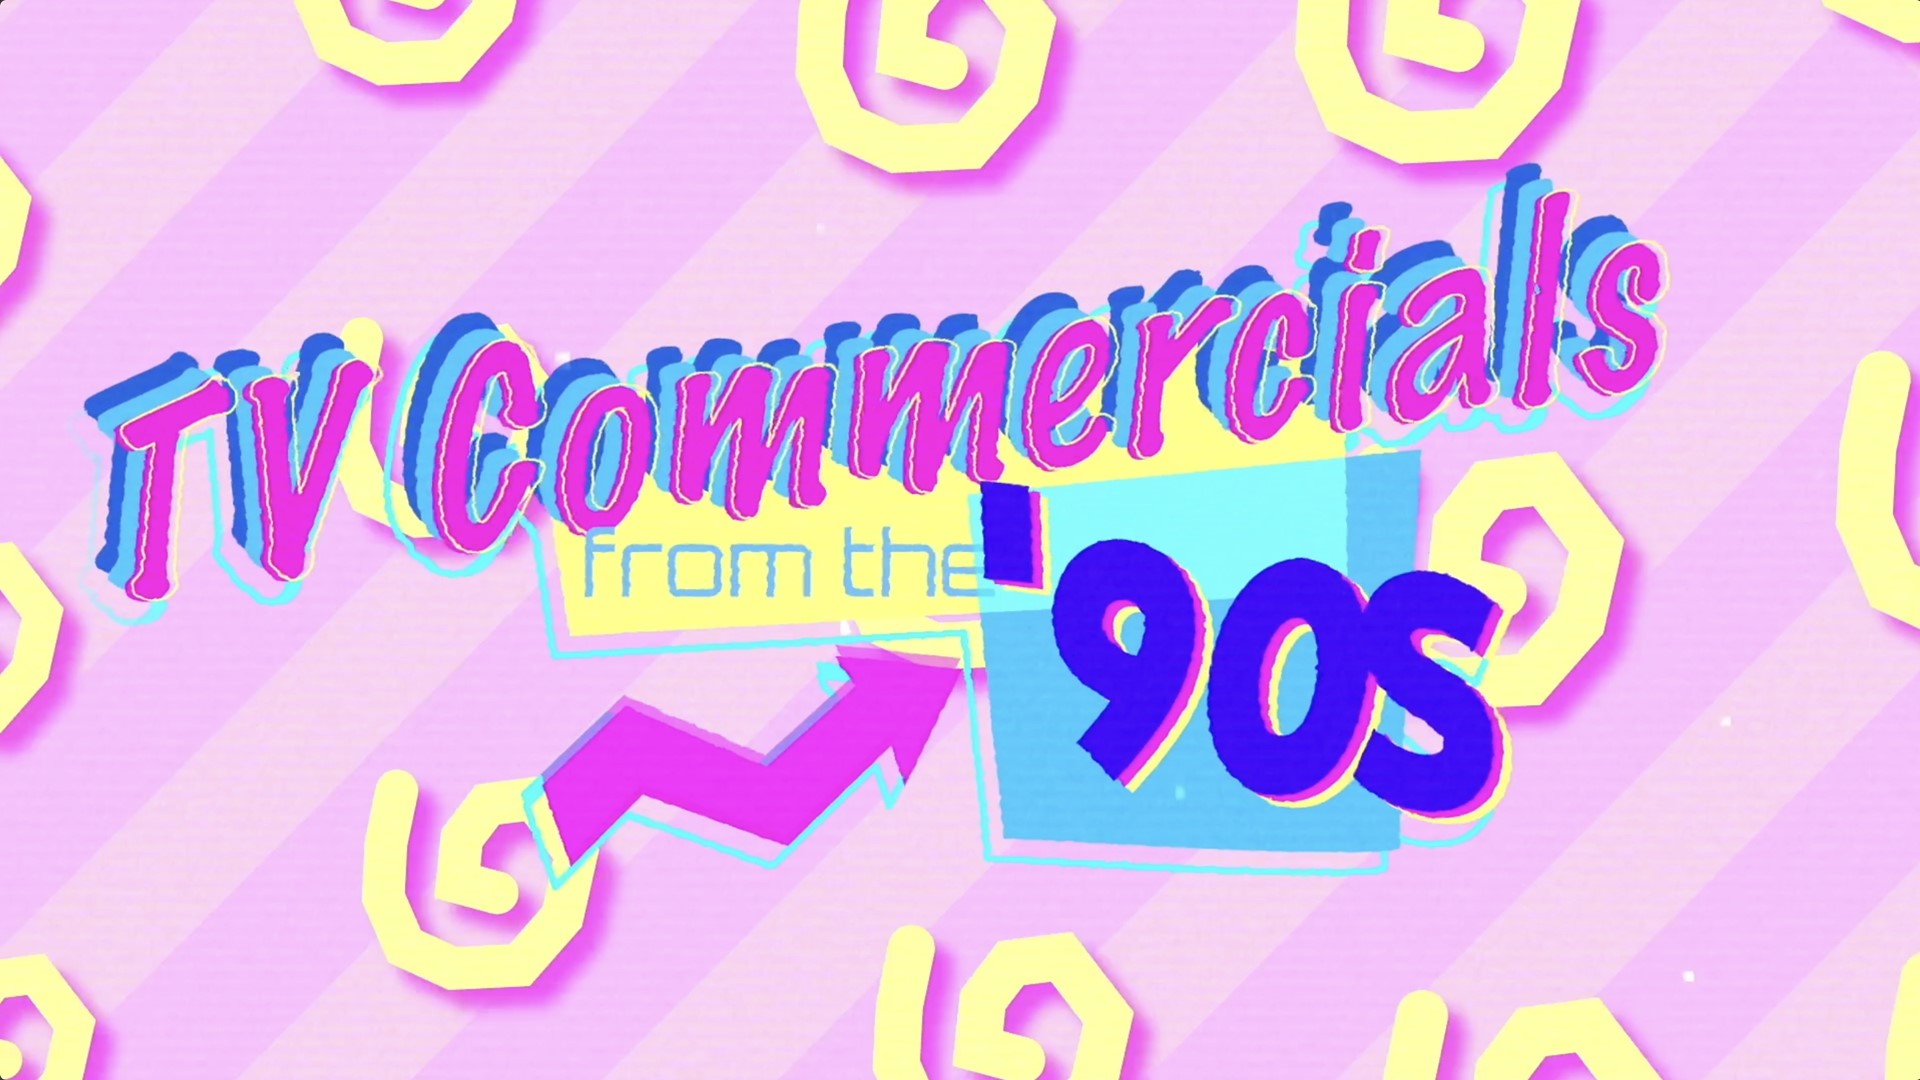 '90s TV commercials - March of 1994